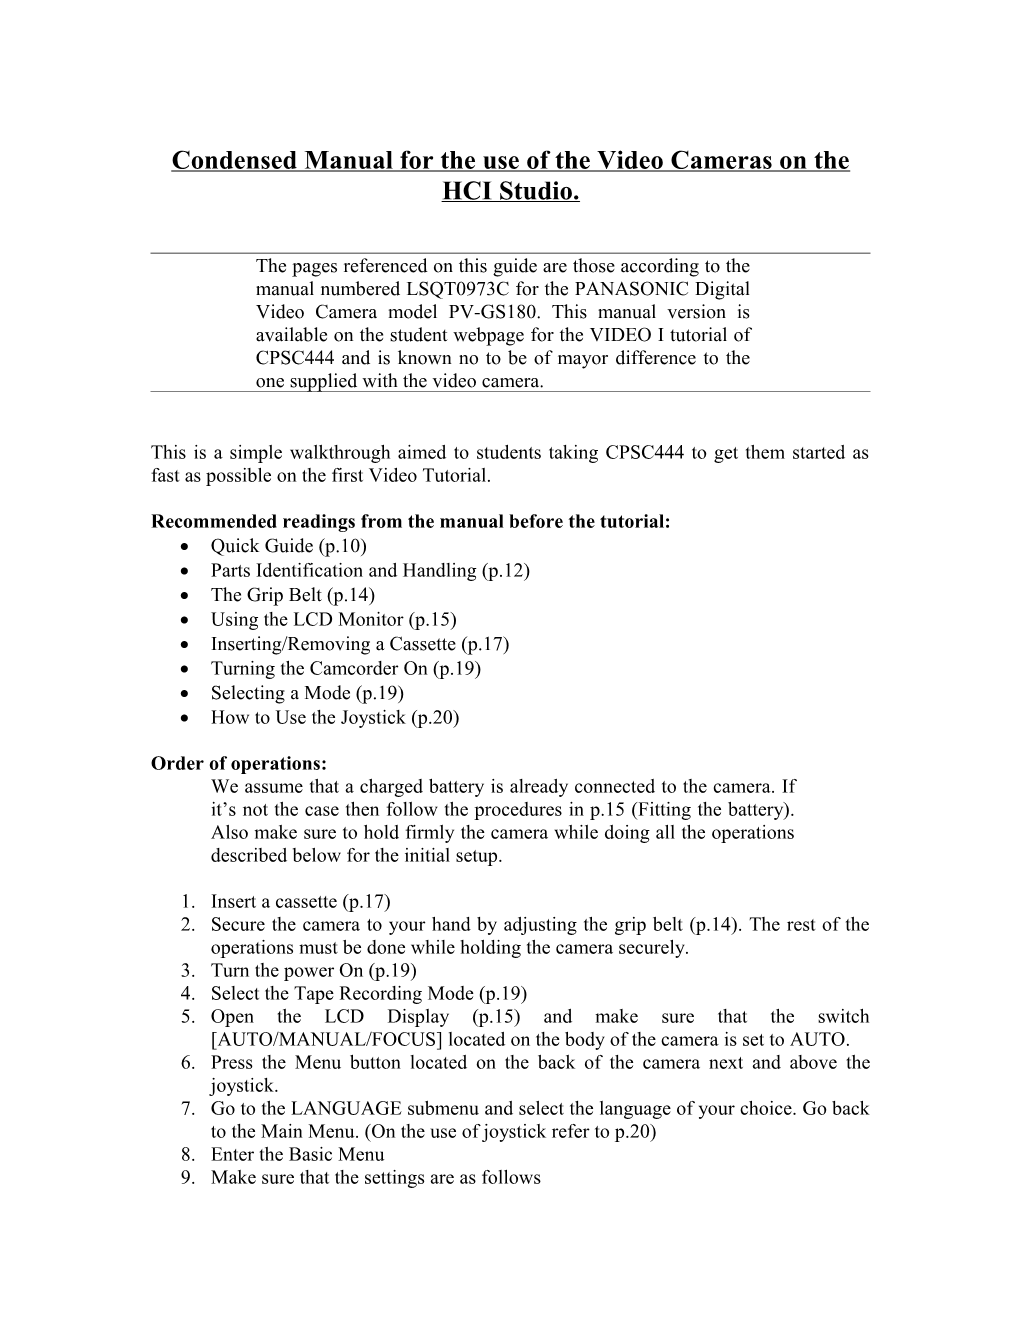 Condensed Manual for the Use of the Video Cameras on the HCI Studio